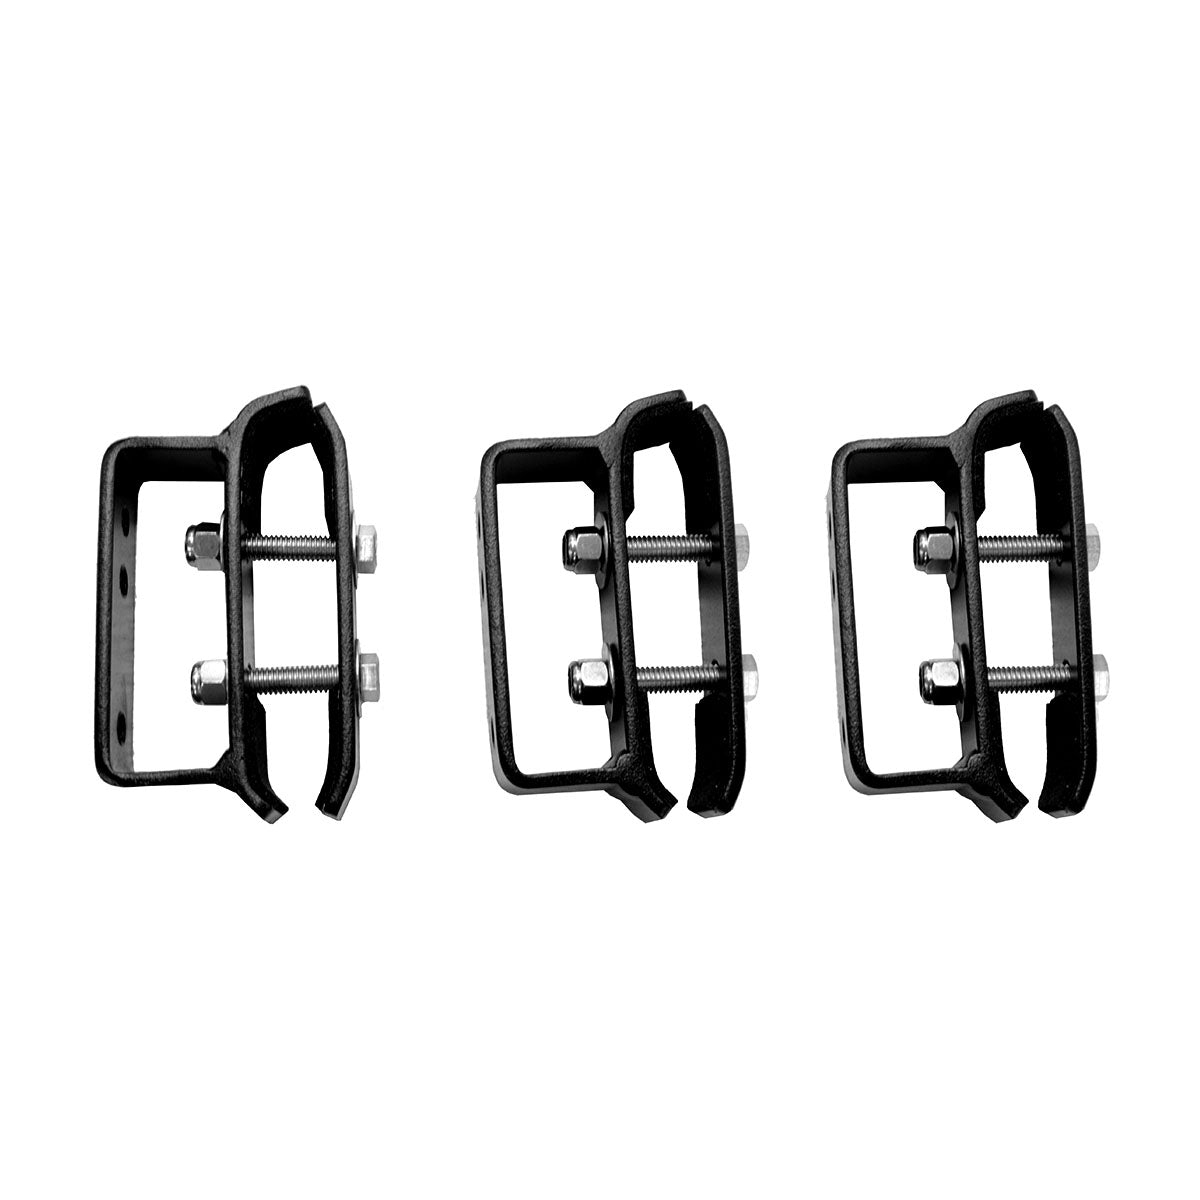 BajaRack Roof Rack Awning Mount for 5" Height Rack (3 pieces)